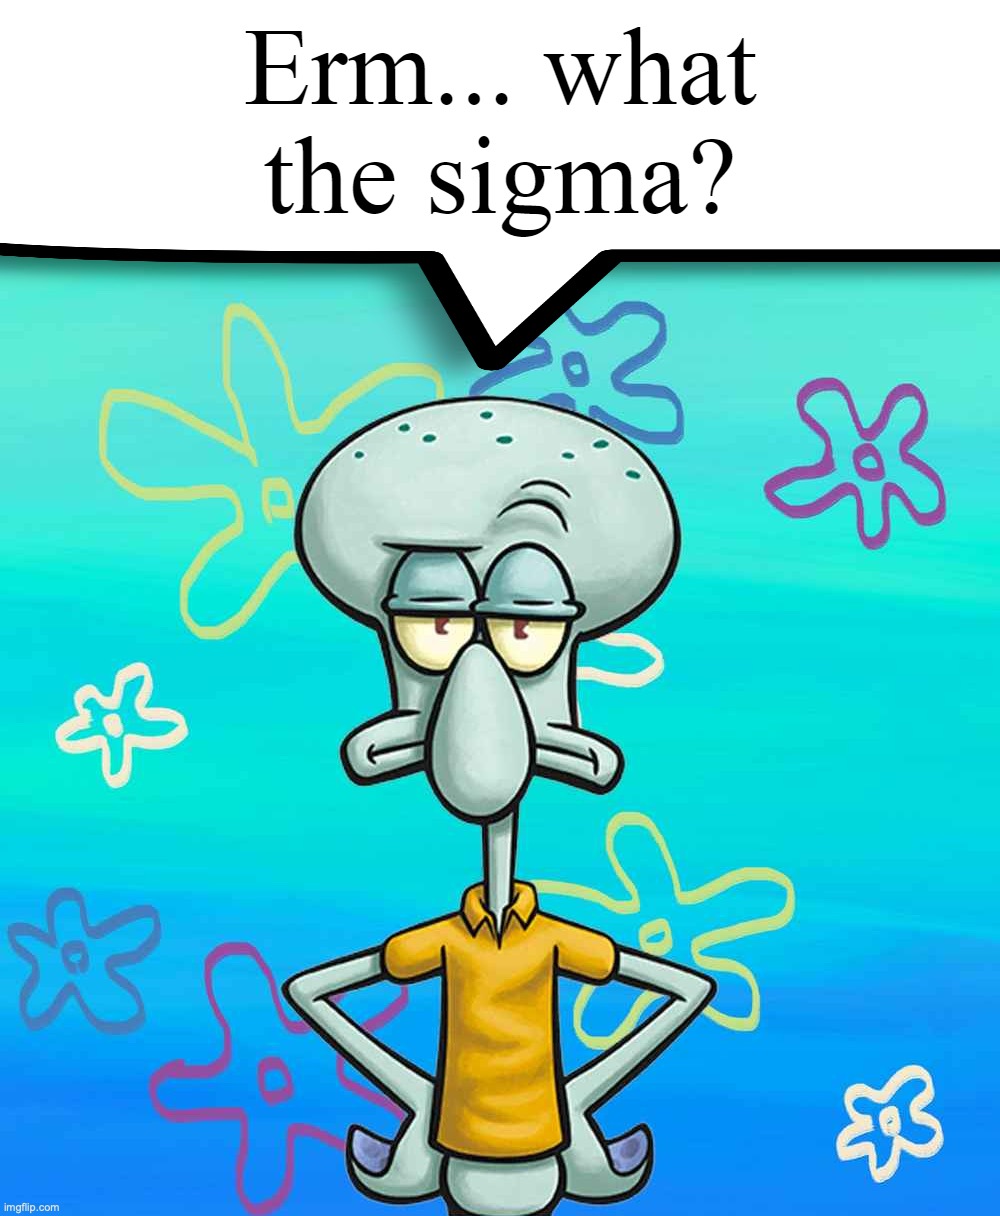 Would you like a sigma? (NOOO) | image tagged in erm what the sigma | made w/ Imgflip meme maker